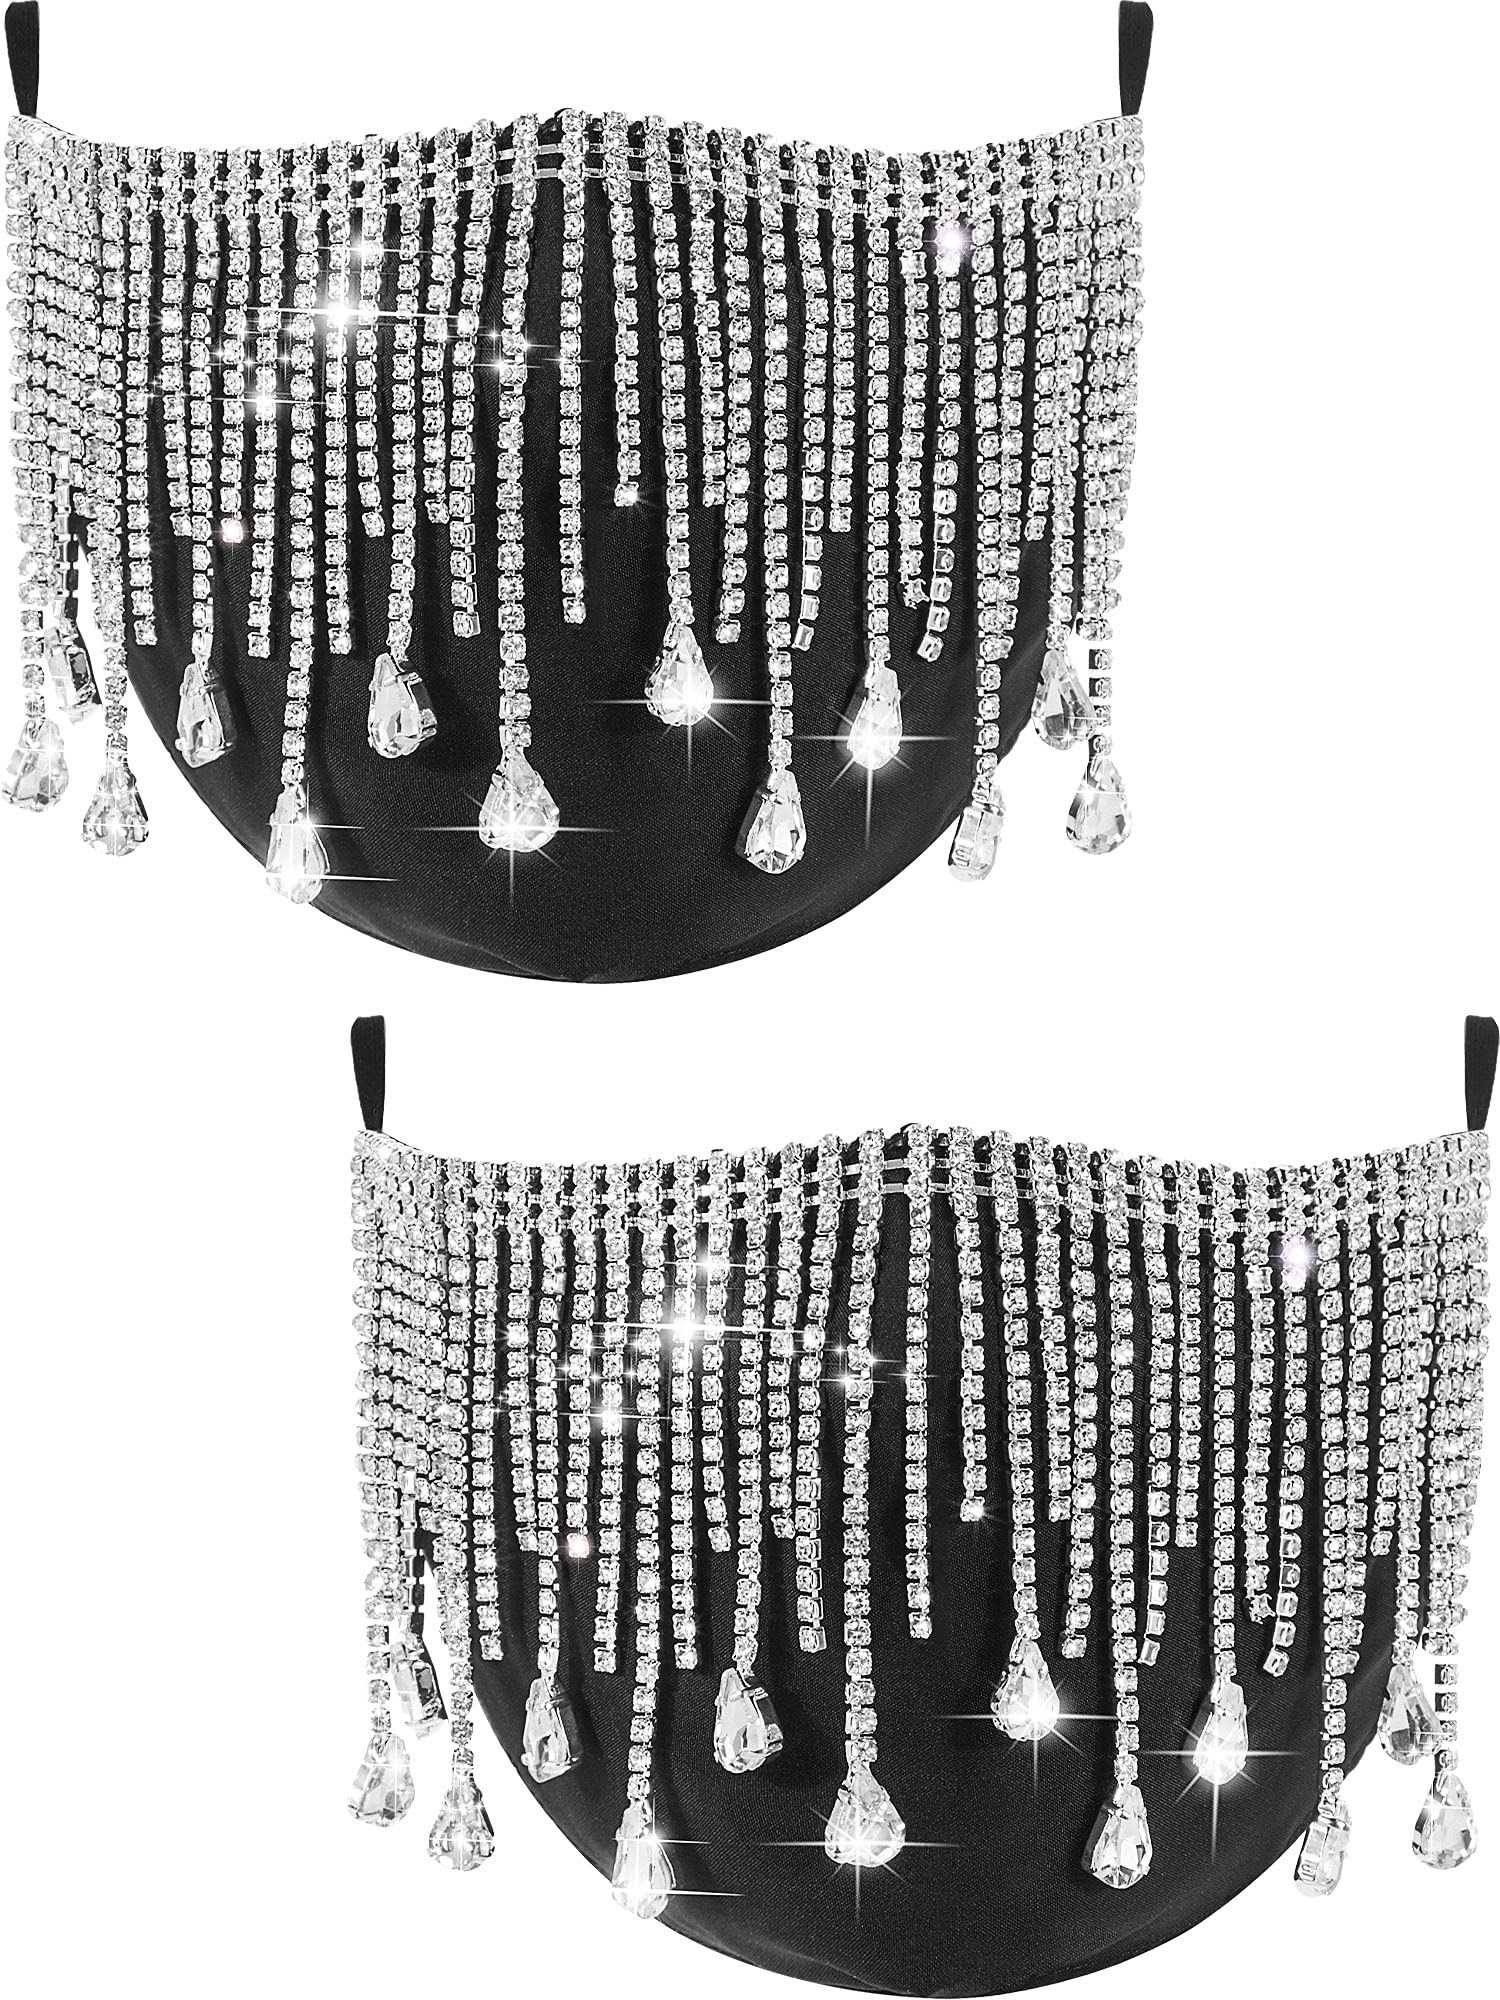 SATINIOR 2 Pieces Sparkly Rhinestones Mesh Face Covers Bling Crystal Black  Tassel Face Cover Halloween Masquerade